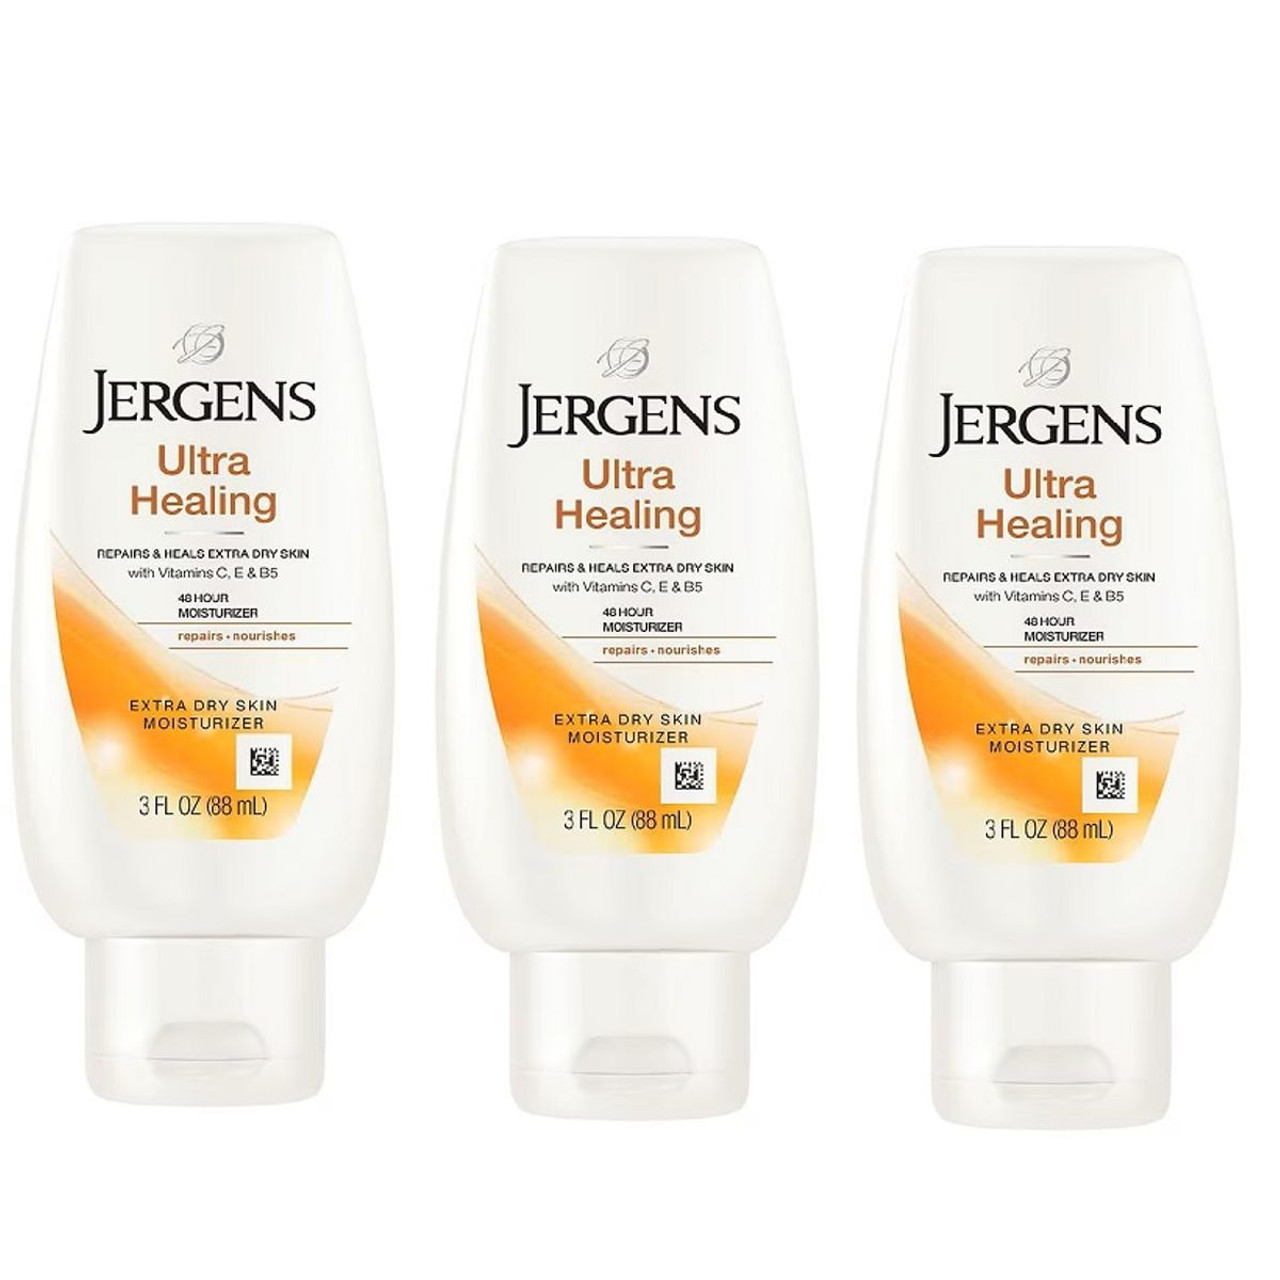 Jergens® Ultra Healing Moisturizer for Extra Dry Skin, 3 fl. oz. (3-Pack) product image